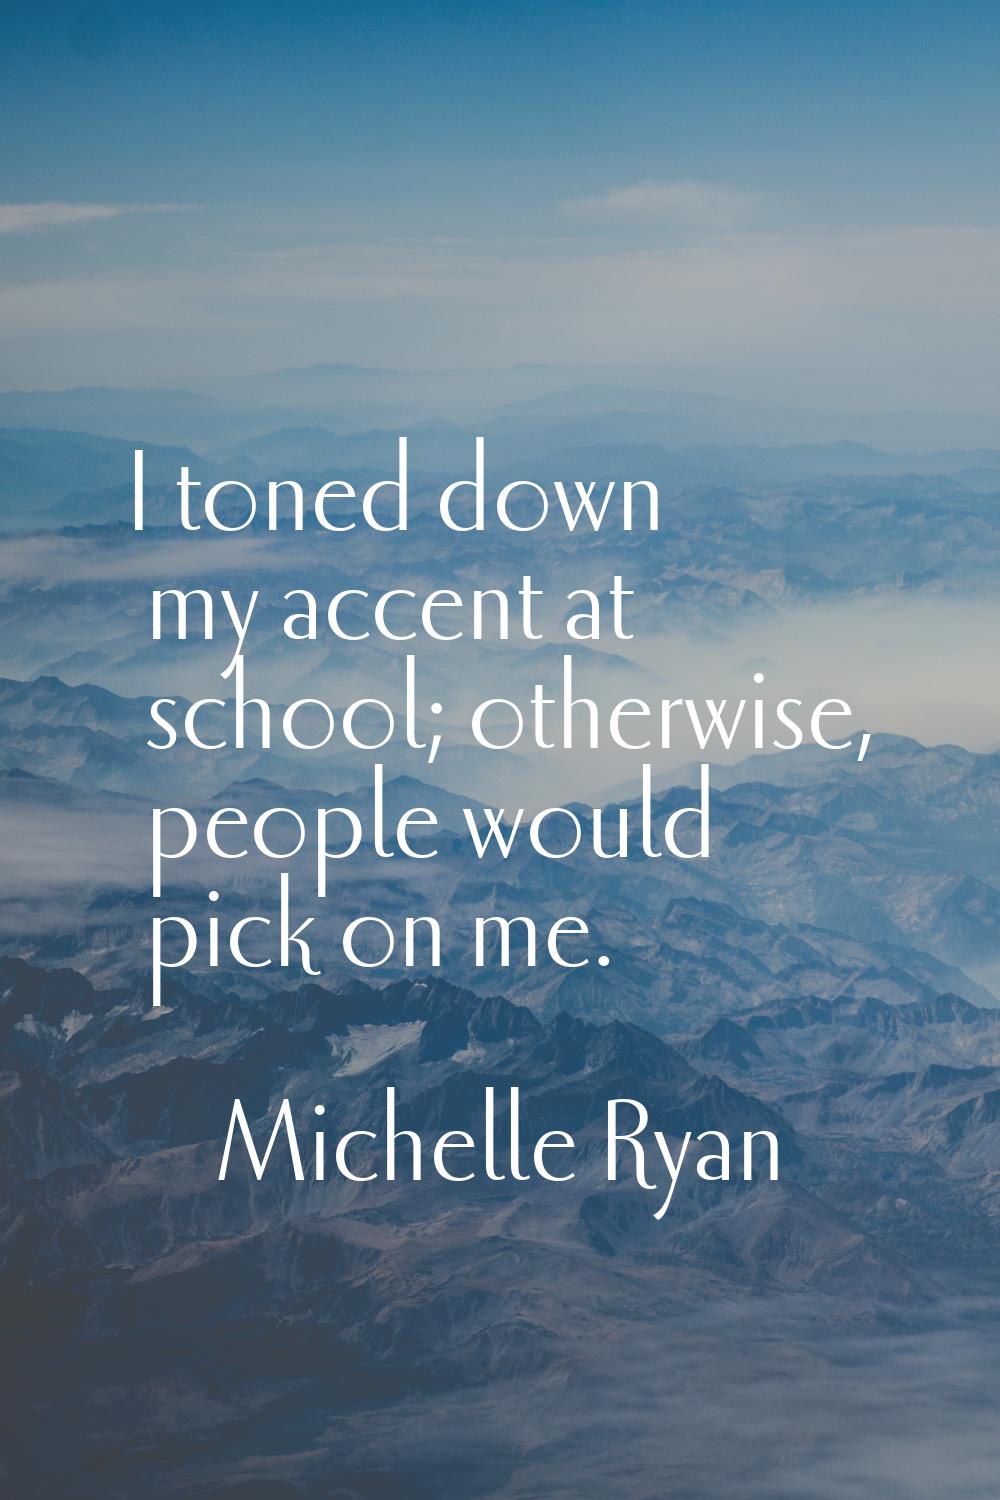 I toned down my accent at school; otherwise, people would pick on me.